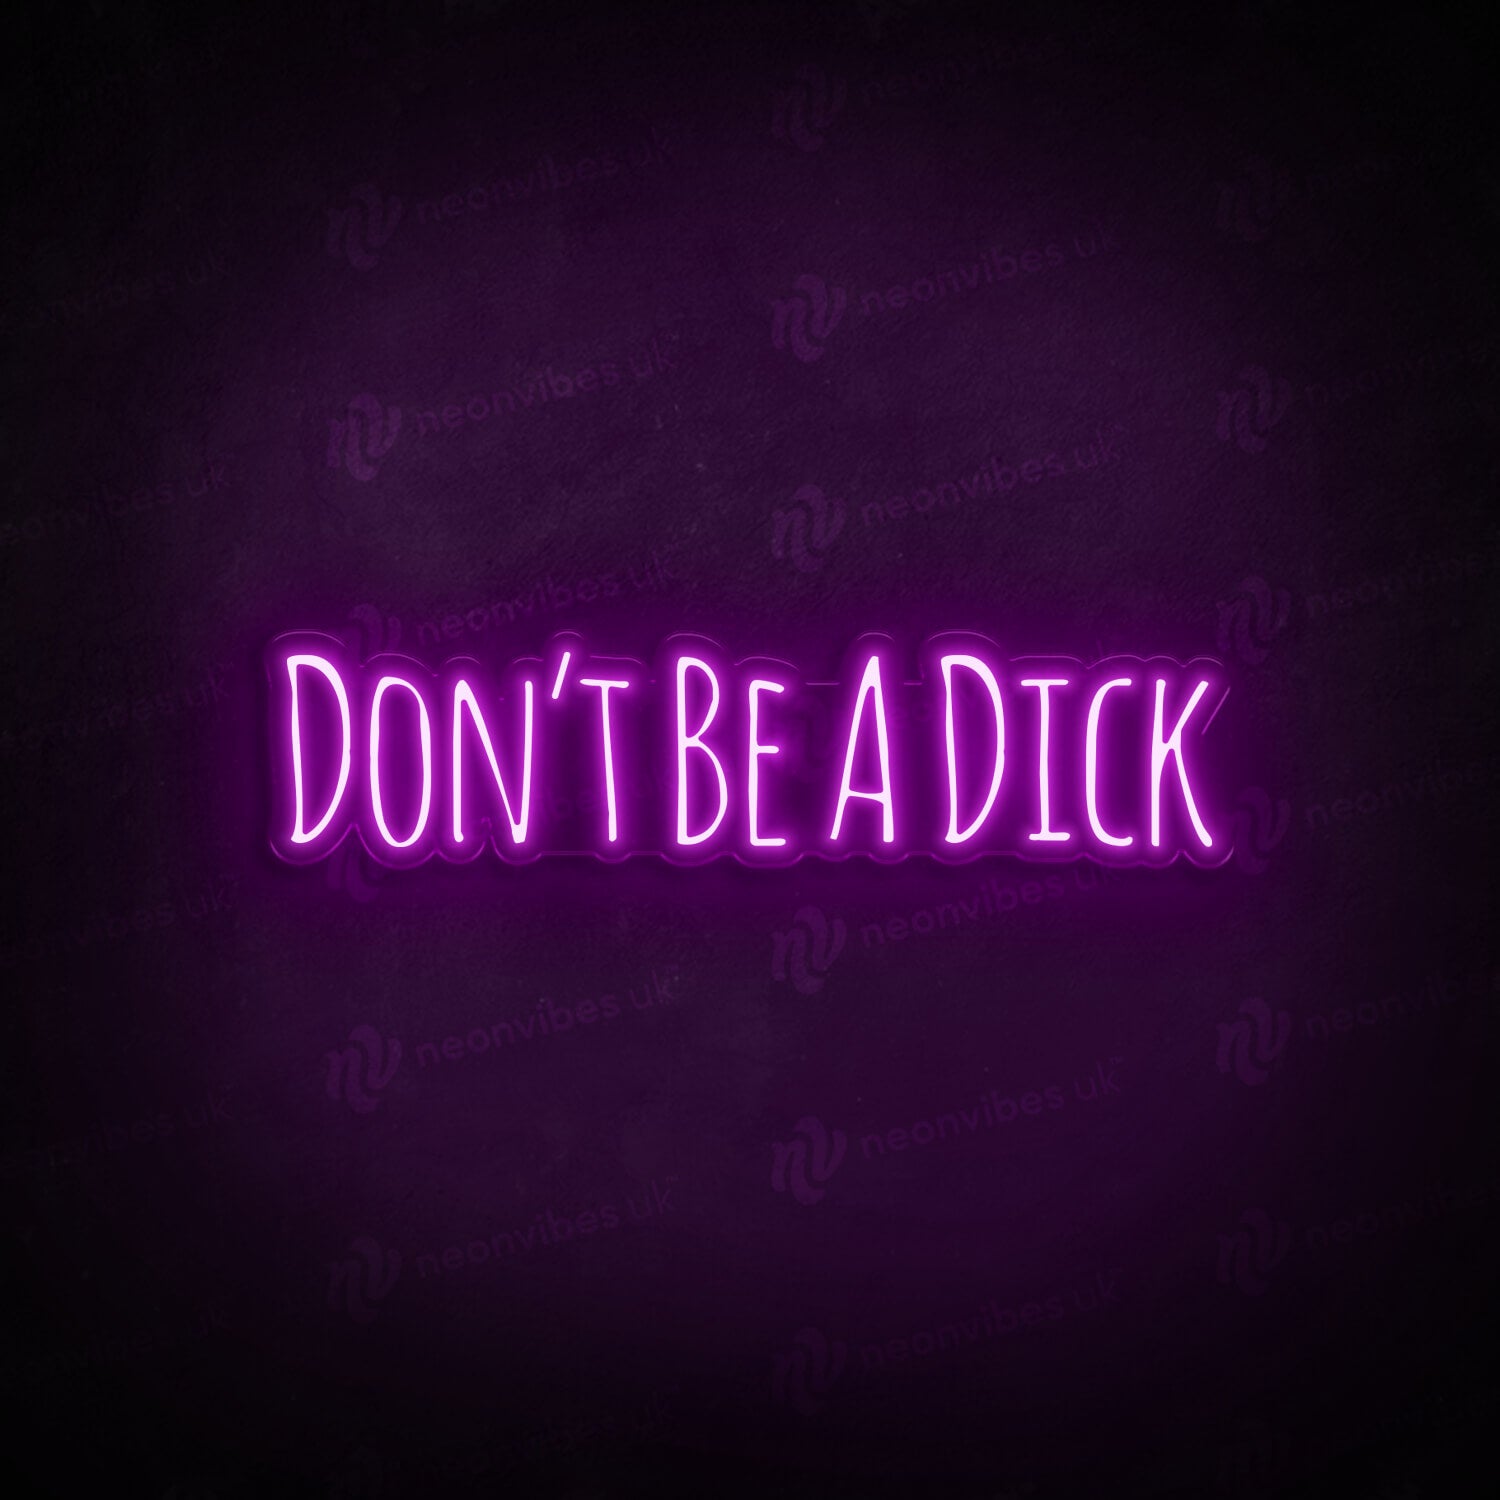 Don't be a dick neon sign